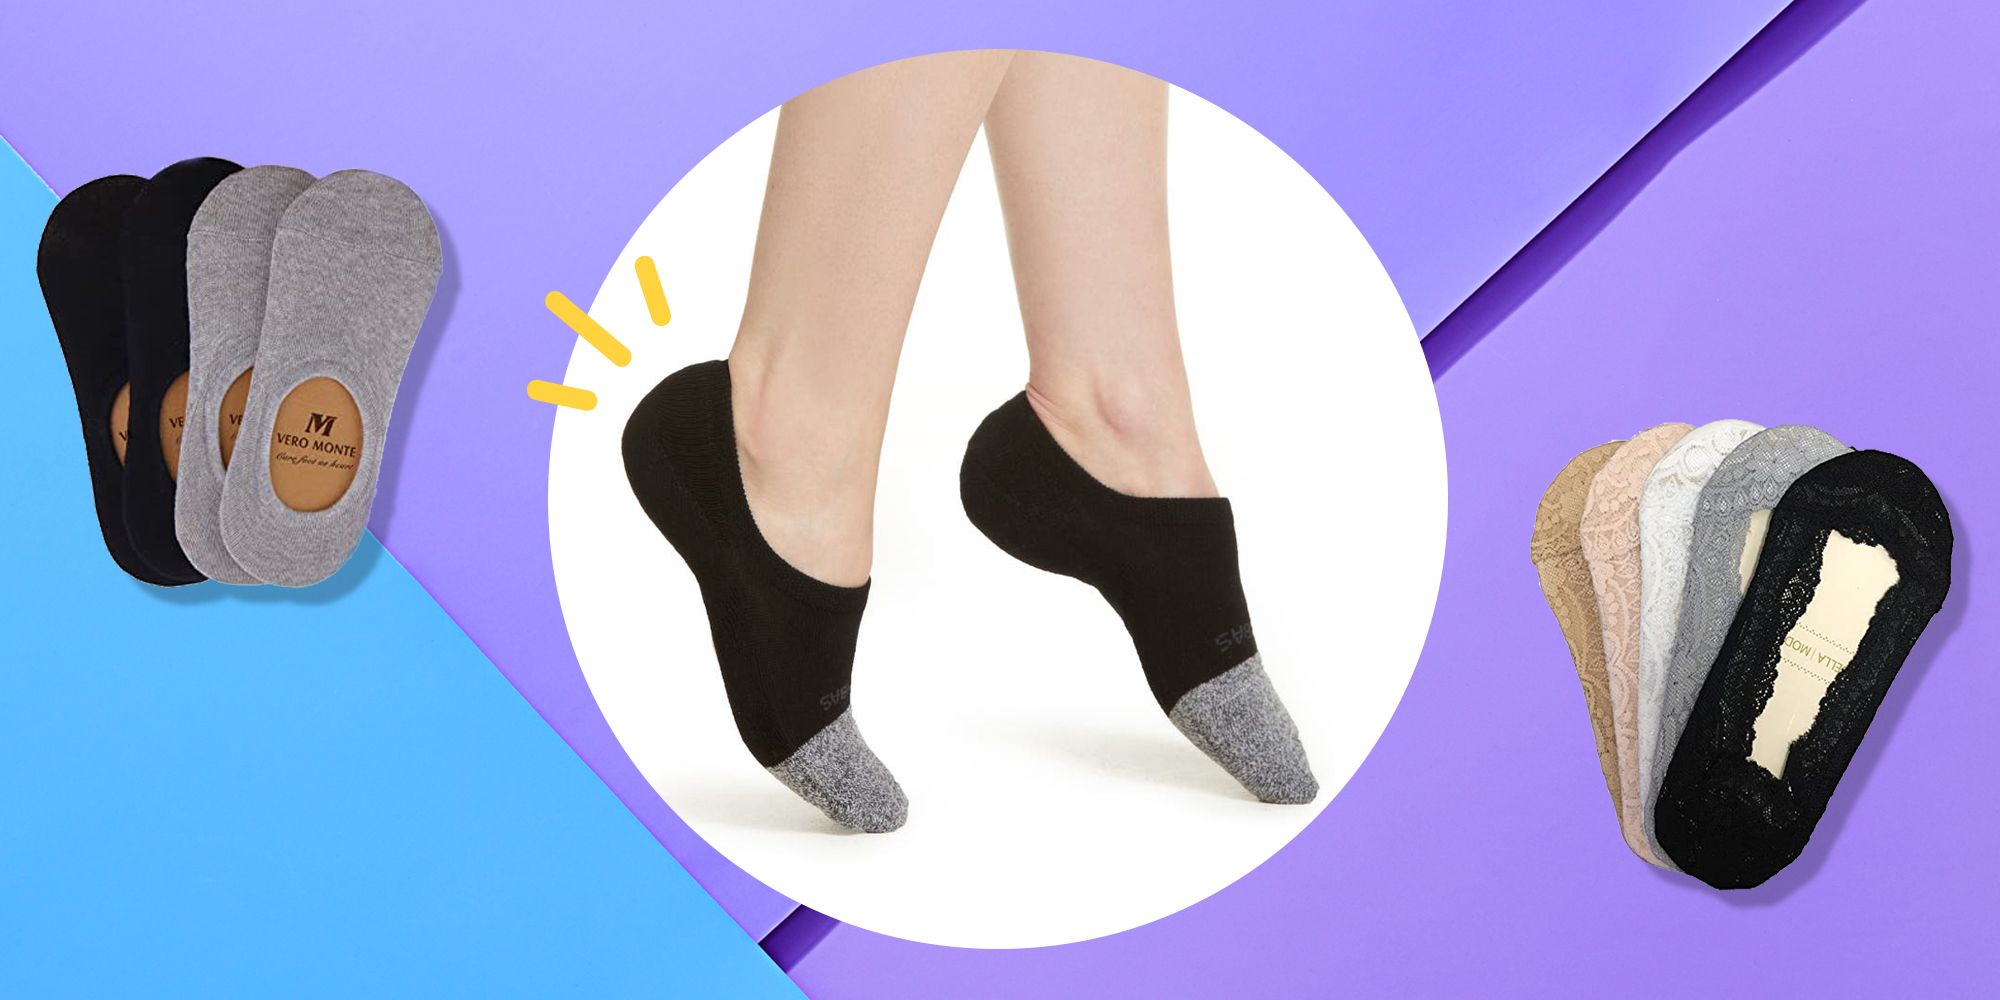 Details about   Womens Sweetheart Invisible No Show Socks Non Skid Breathable Slipper Sock Pair 